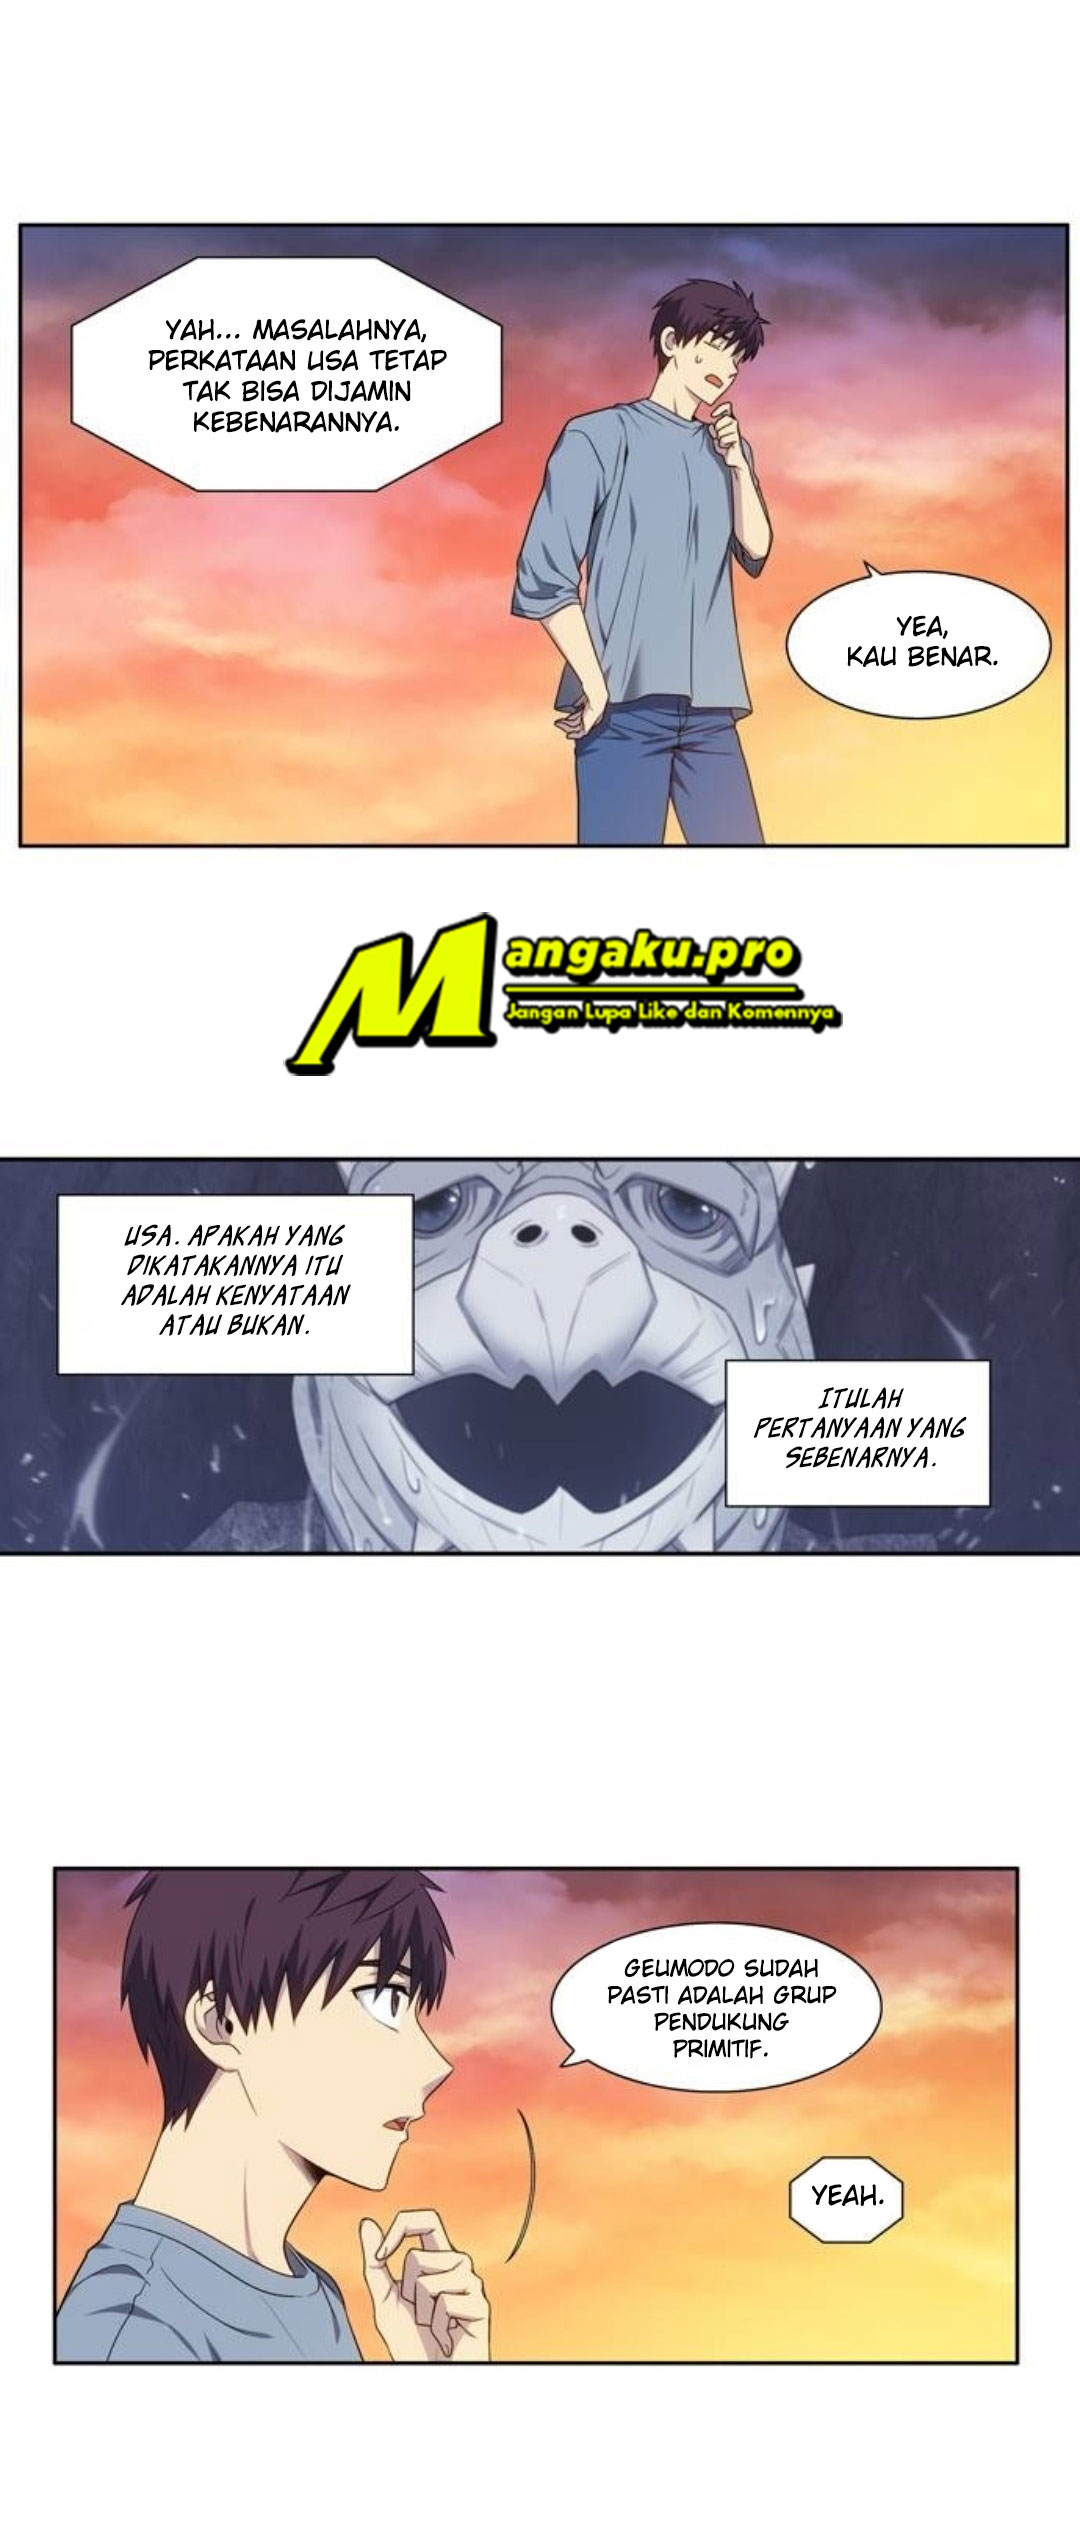 The Gamer Chapter 349-350